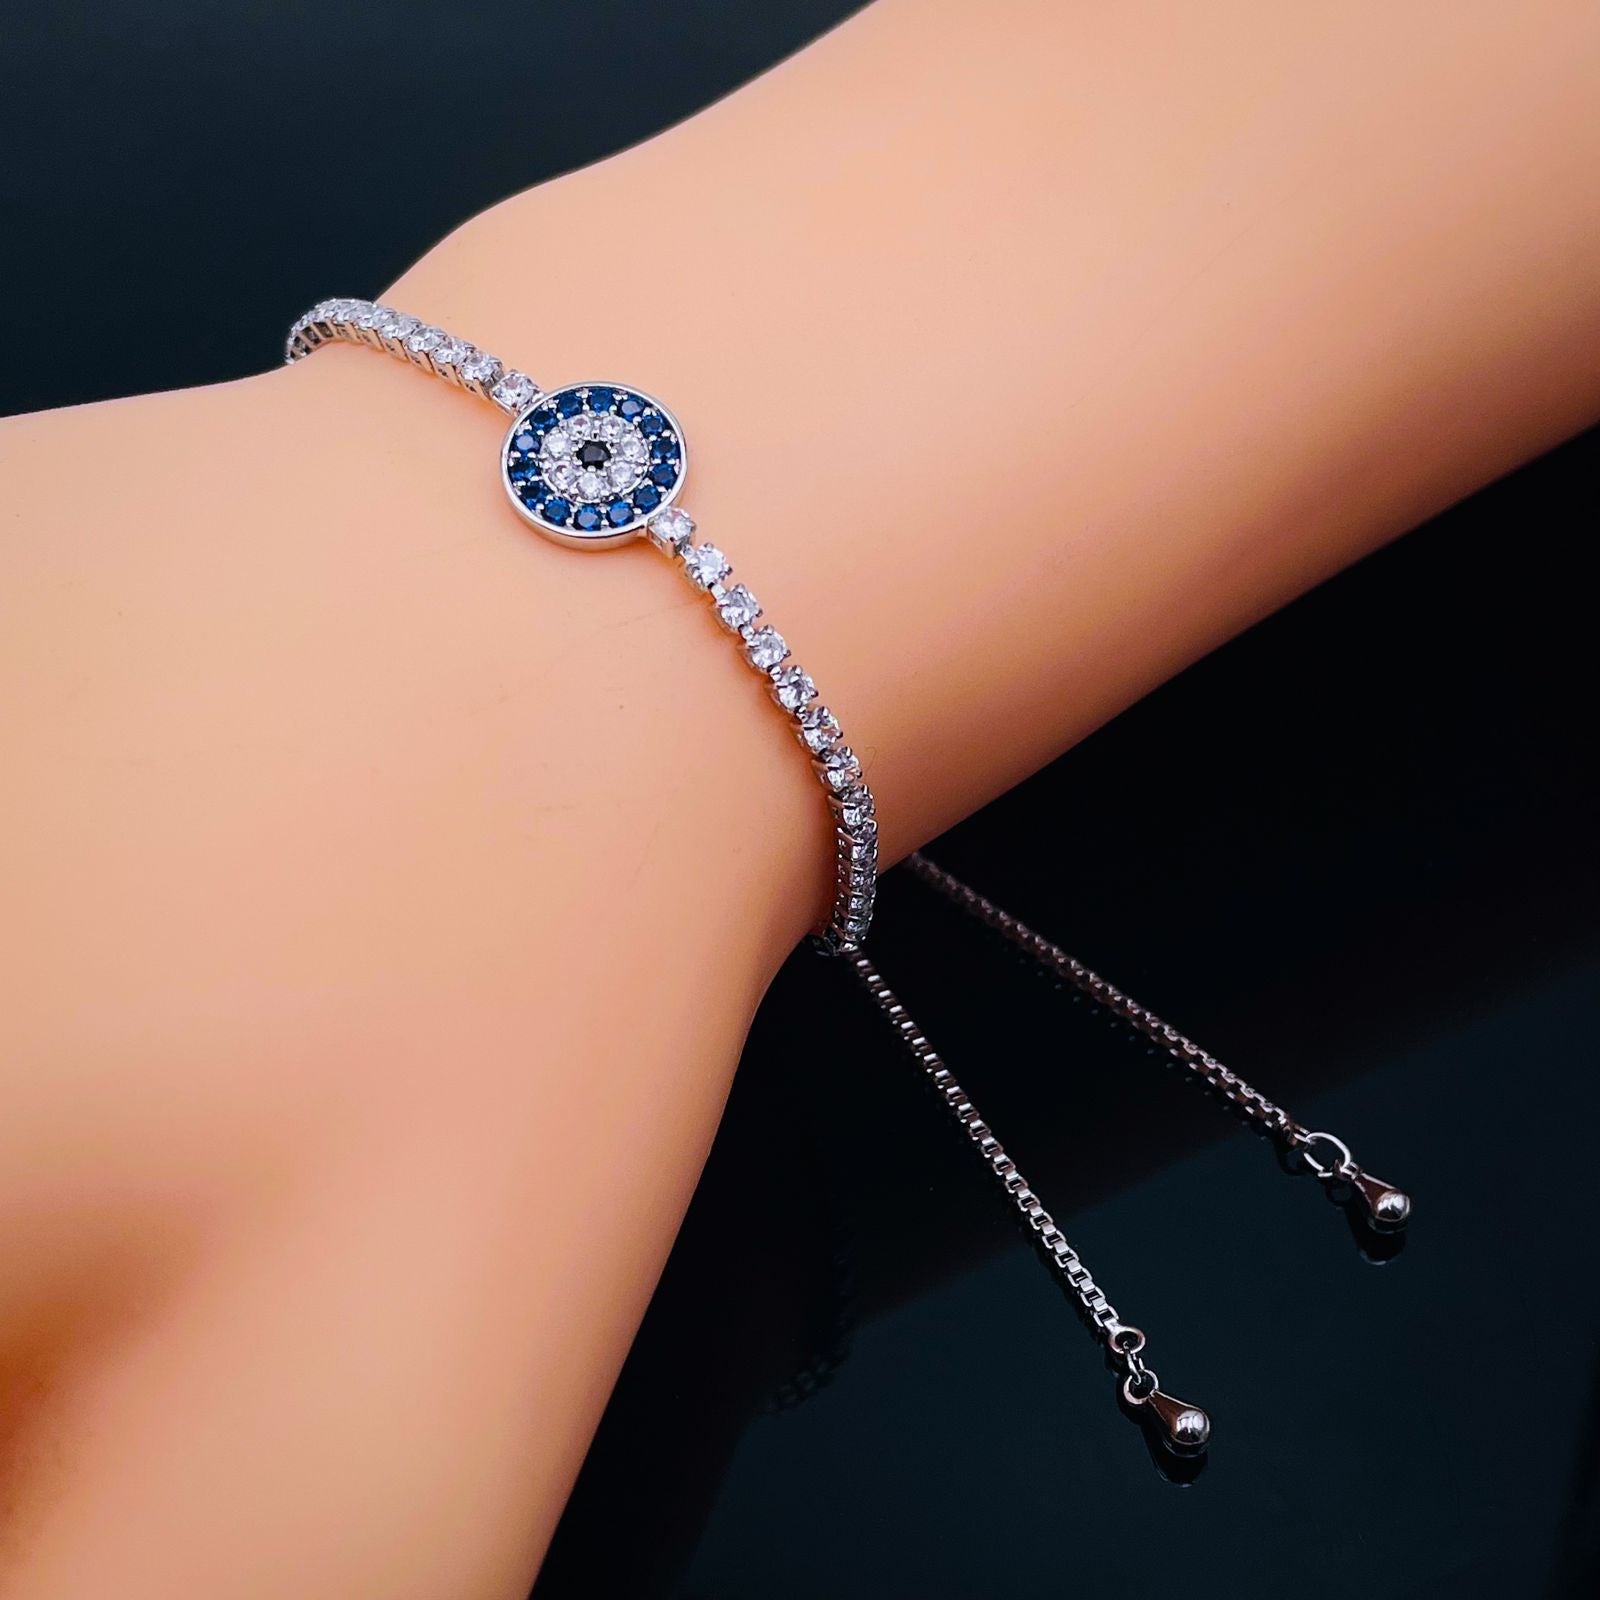 Get the Perfect Accessory with our Silver Evil Eye Chain Bracelet - Swashaa